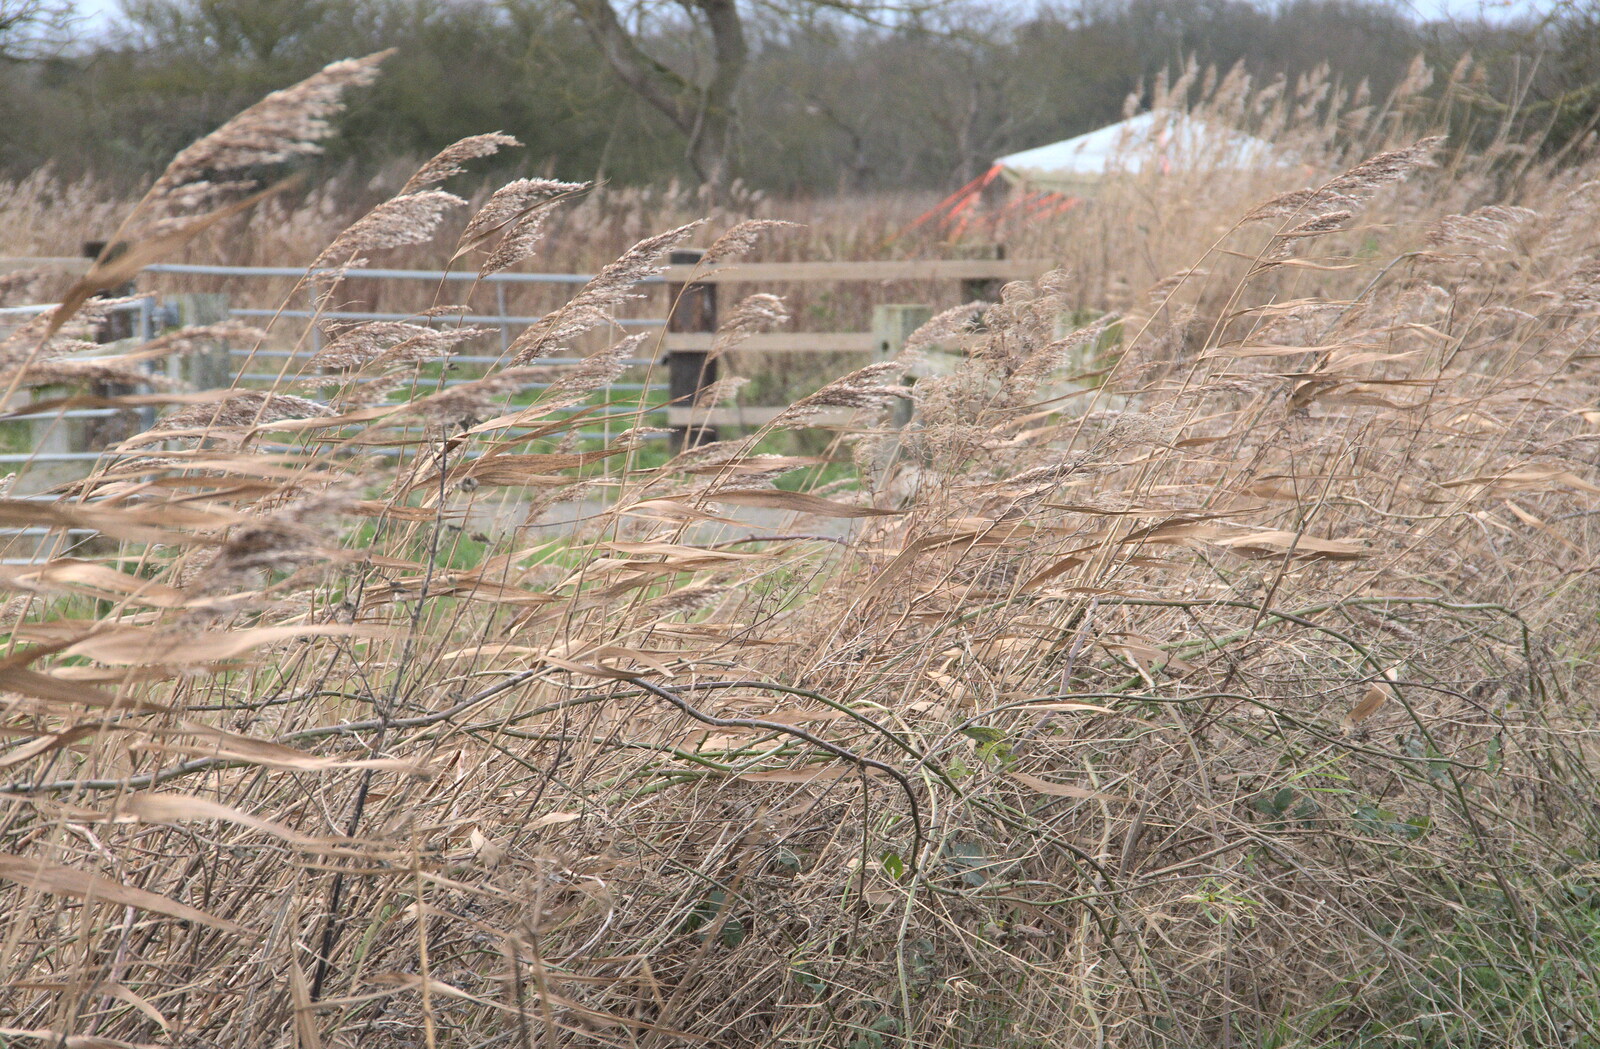 The grasses are blown horizontal by the strong wind from To See the Seals, Horsey Gap, Norfolk - 10th January 2020